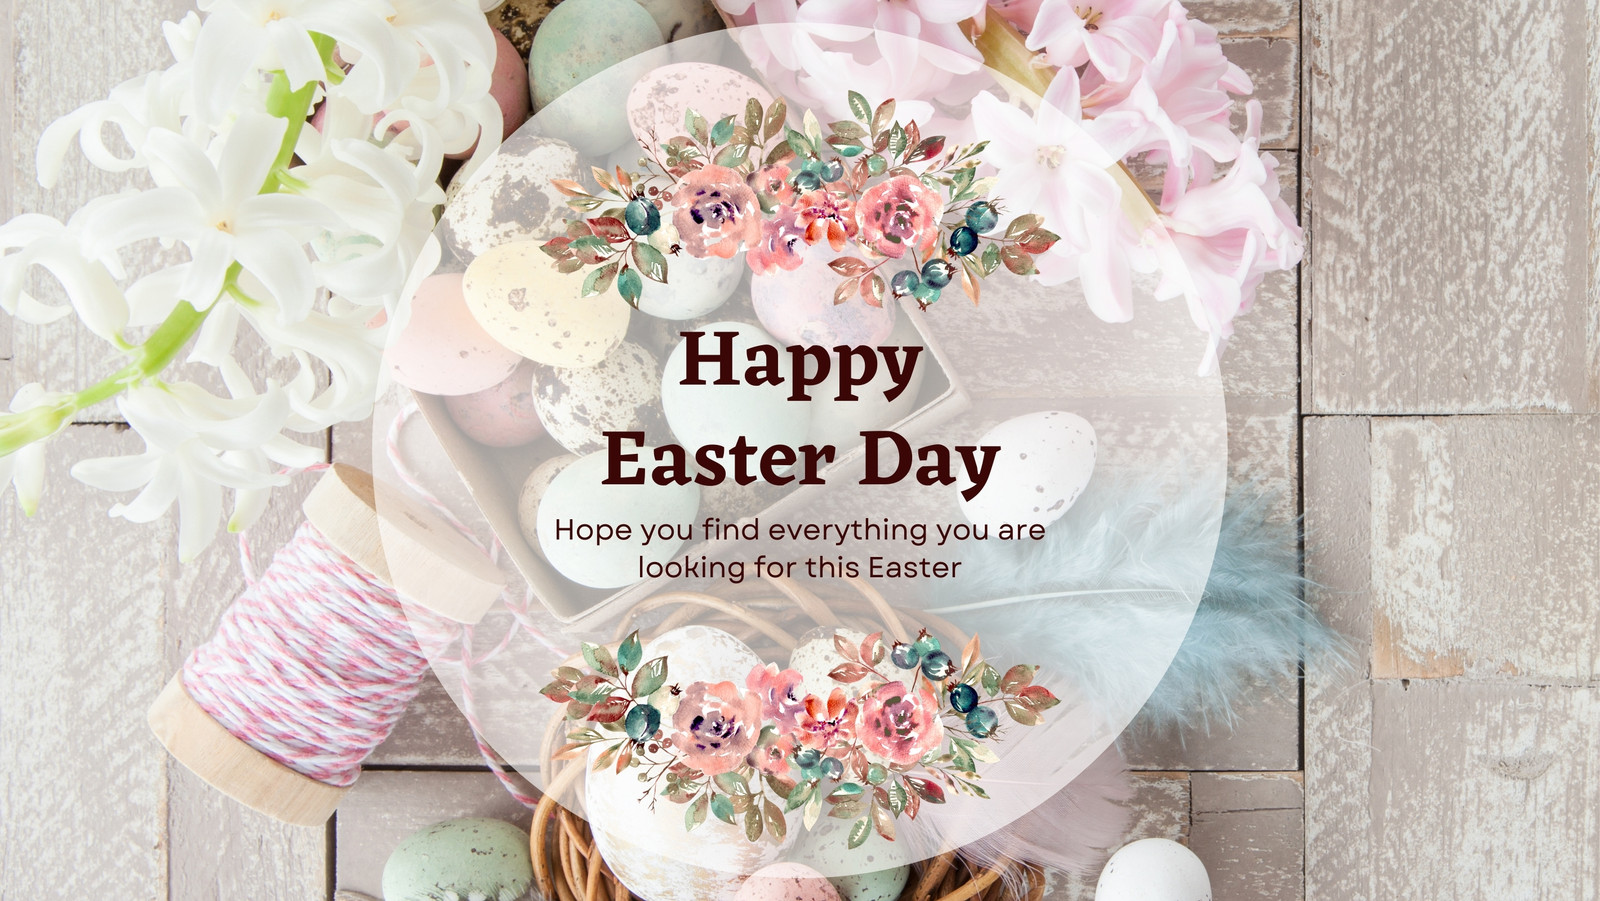 Customize 492+ Easter Facebook Cover Templates Online - Canva